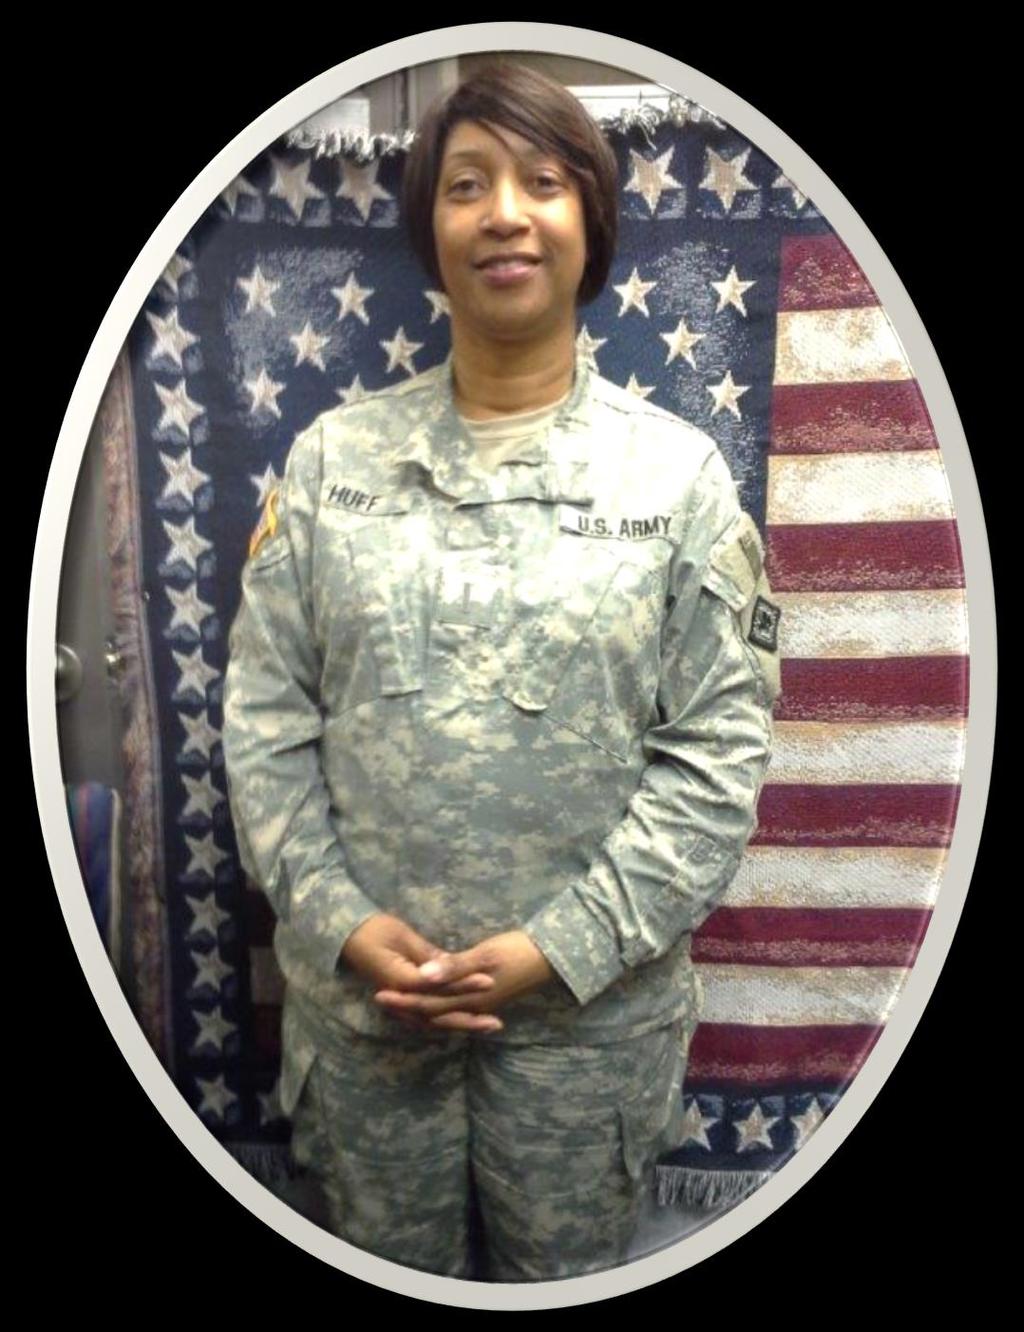 CW5 Pamela Huff Pamela (Marshall) Huff began her military career in 1975 with the Arkansas Army National Guard after graduating high school.